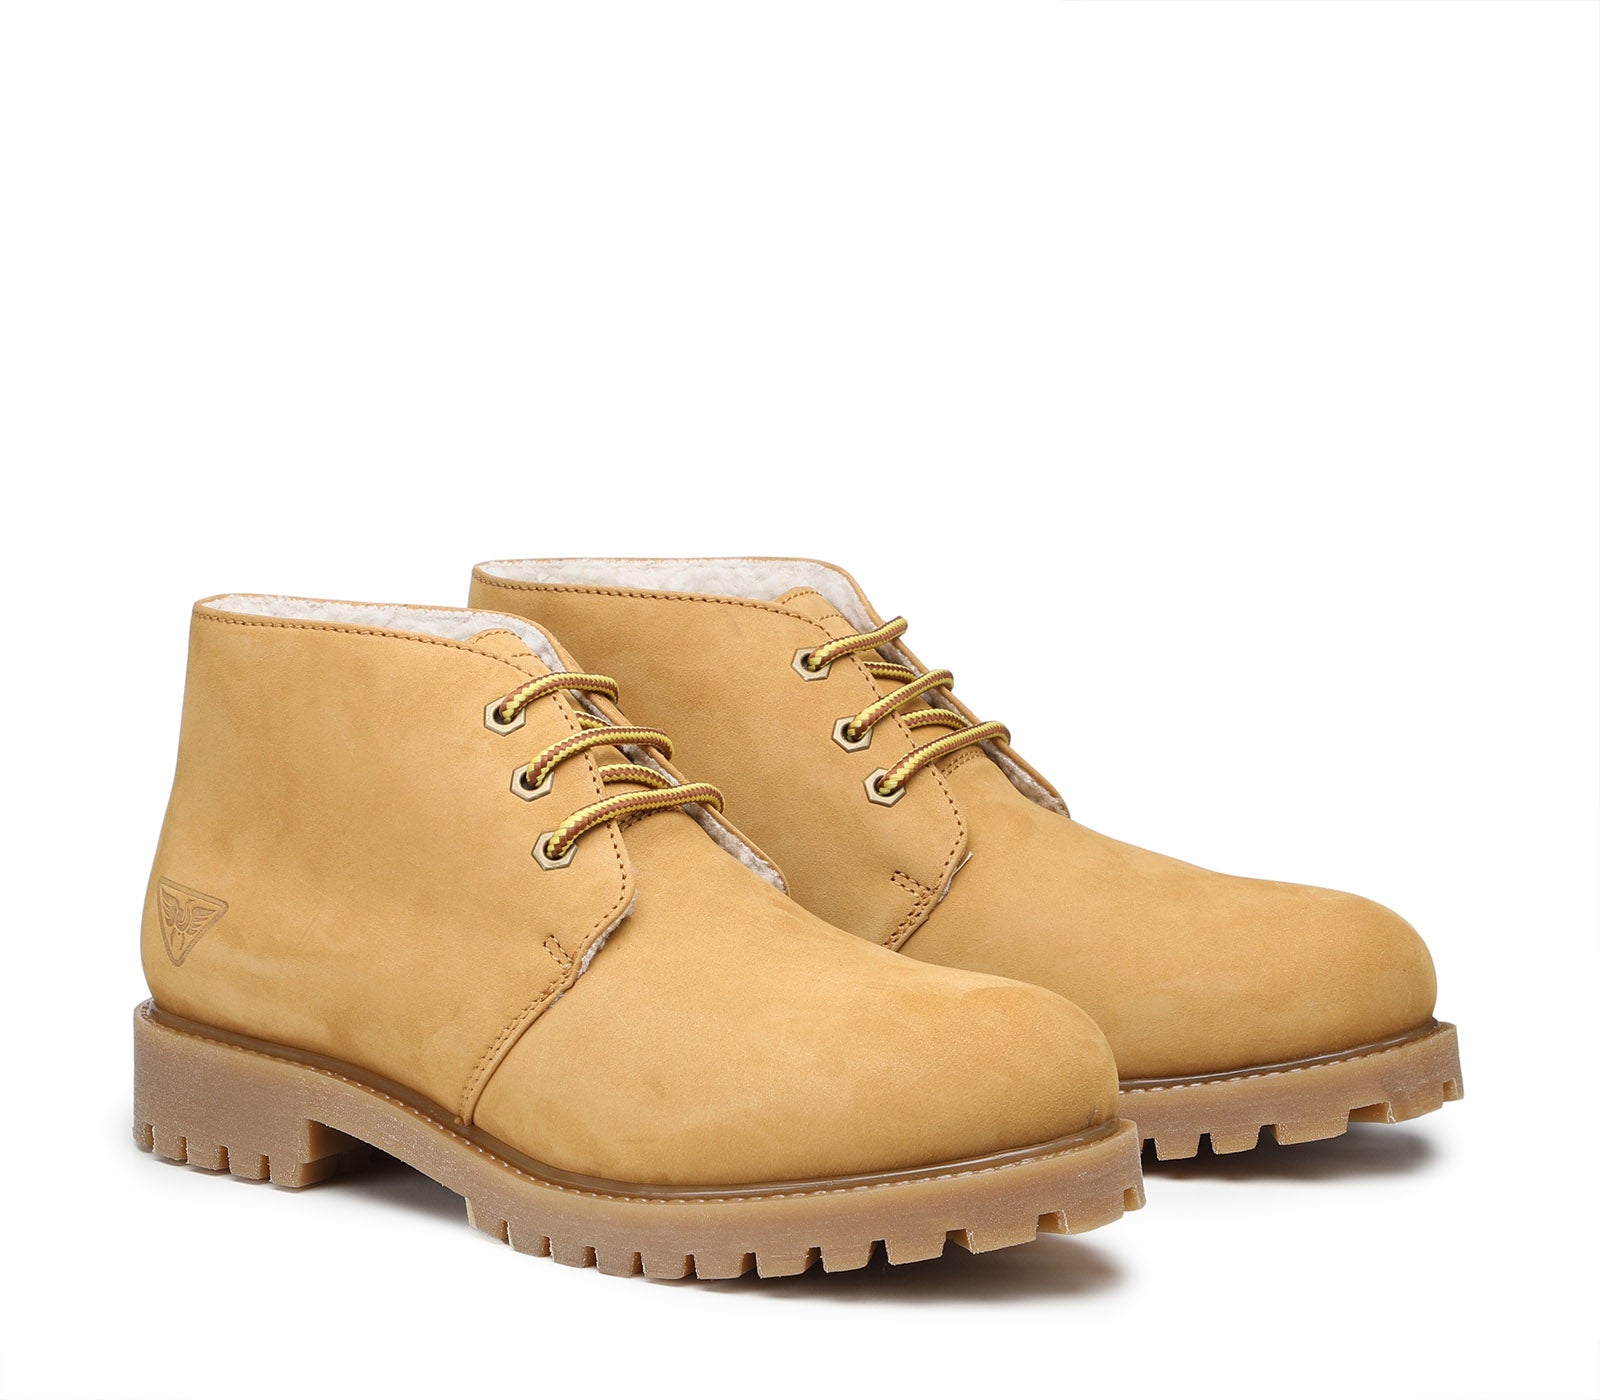 Men's leather boot Yellow